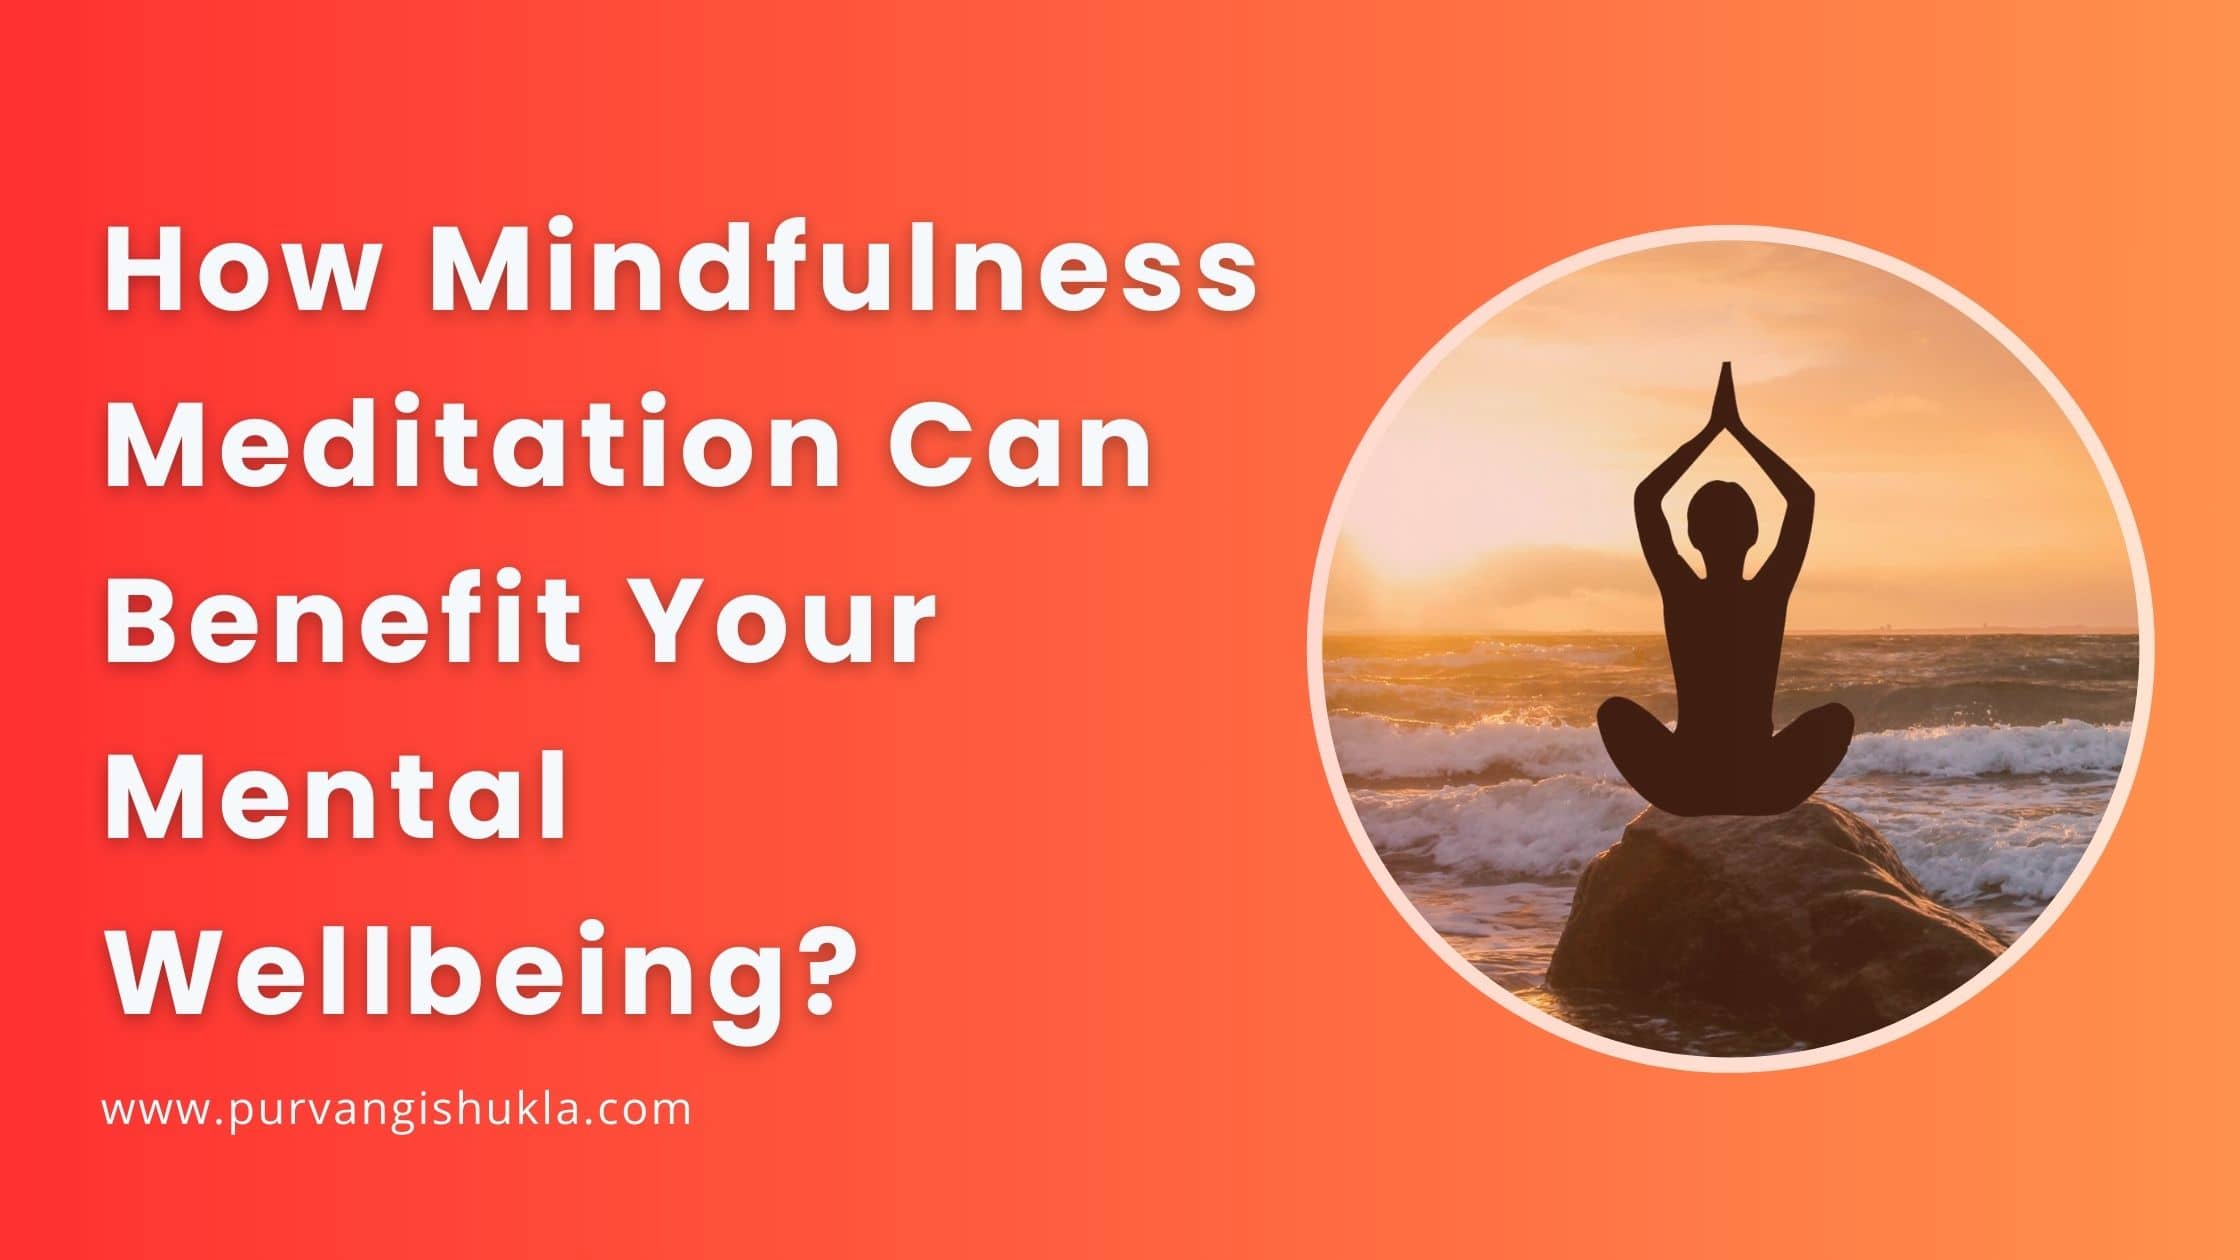 How Mindfulness Meditation Can Benefit Your Mental Wellbeing